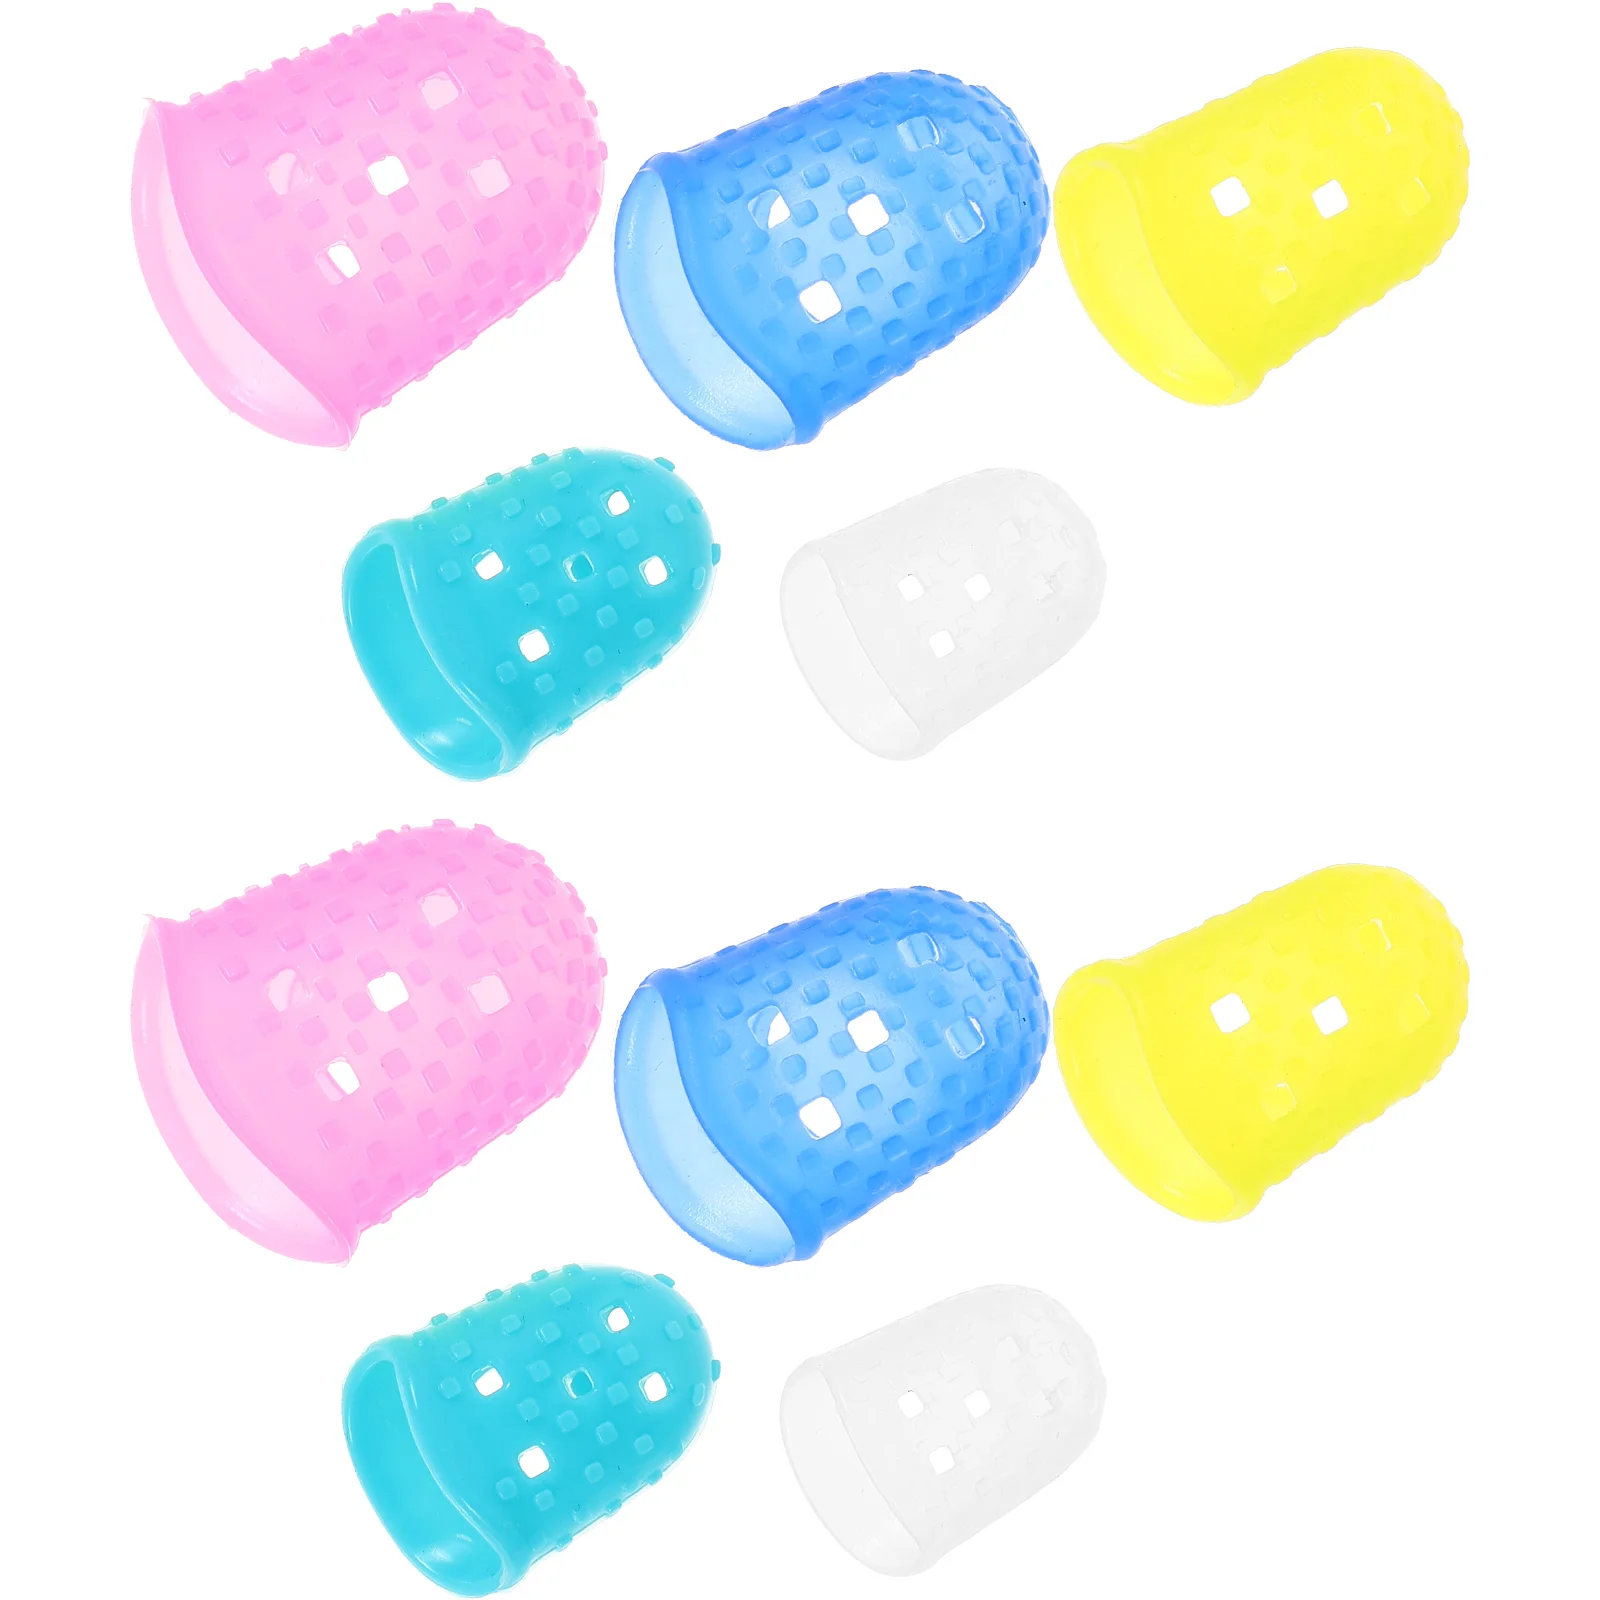 

10 Pcs Silicone Finger Tips Covers Playing Guitar Hat Protectors Fingertip Fingers Guard Caps Piano